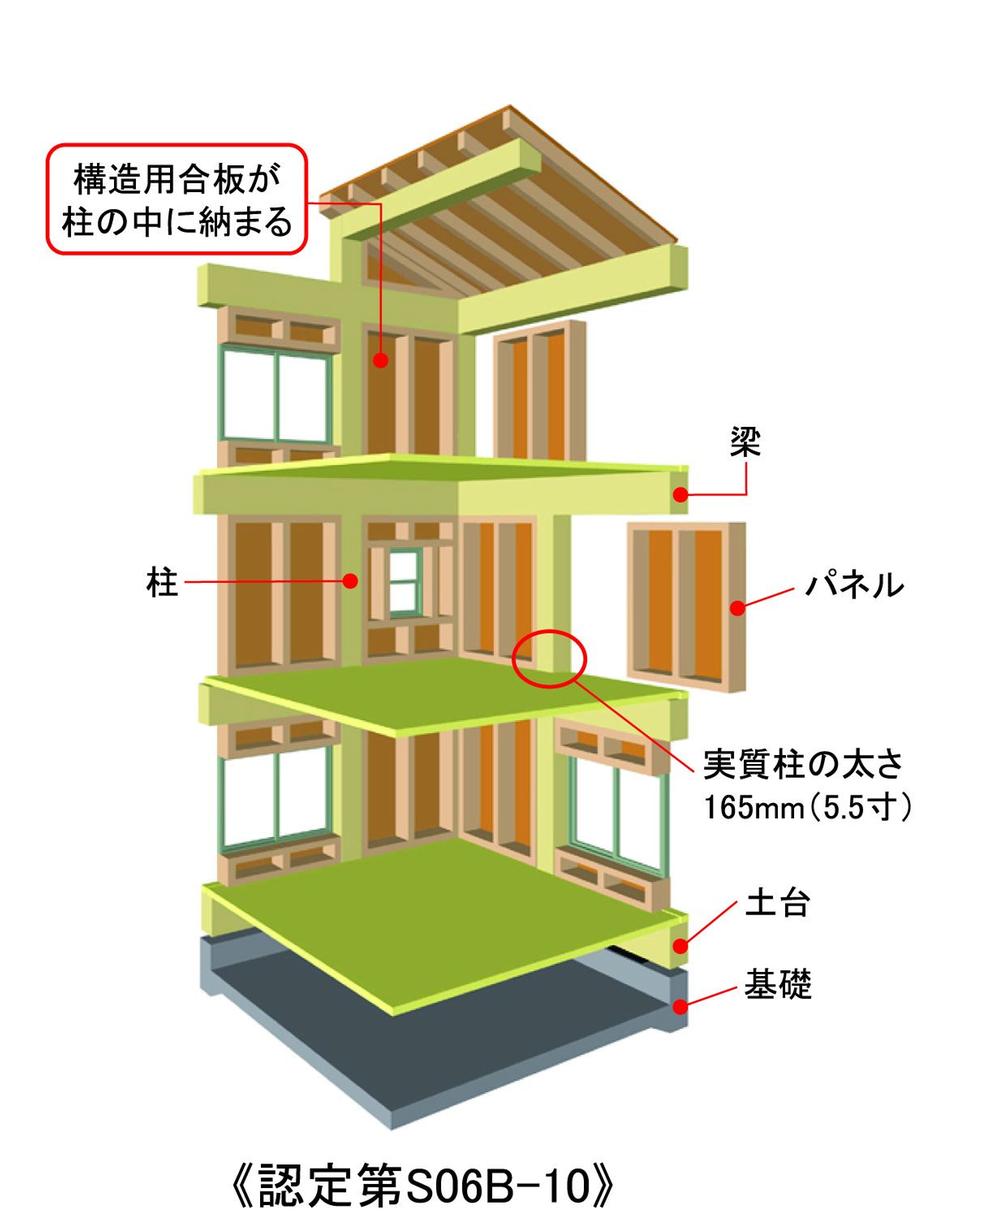 Construction ・ Construction method ・ specification. It is a method to support in the pillar and wall